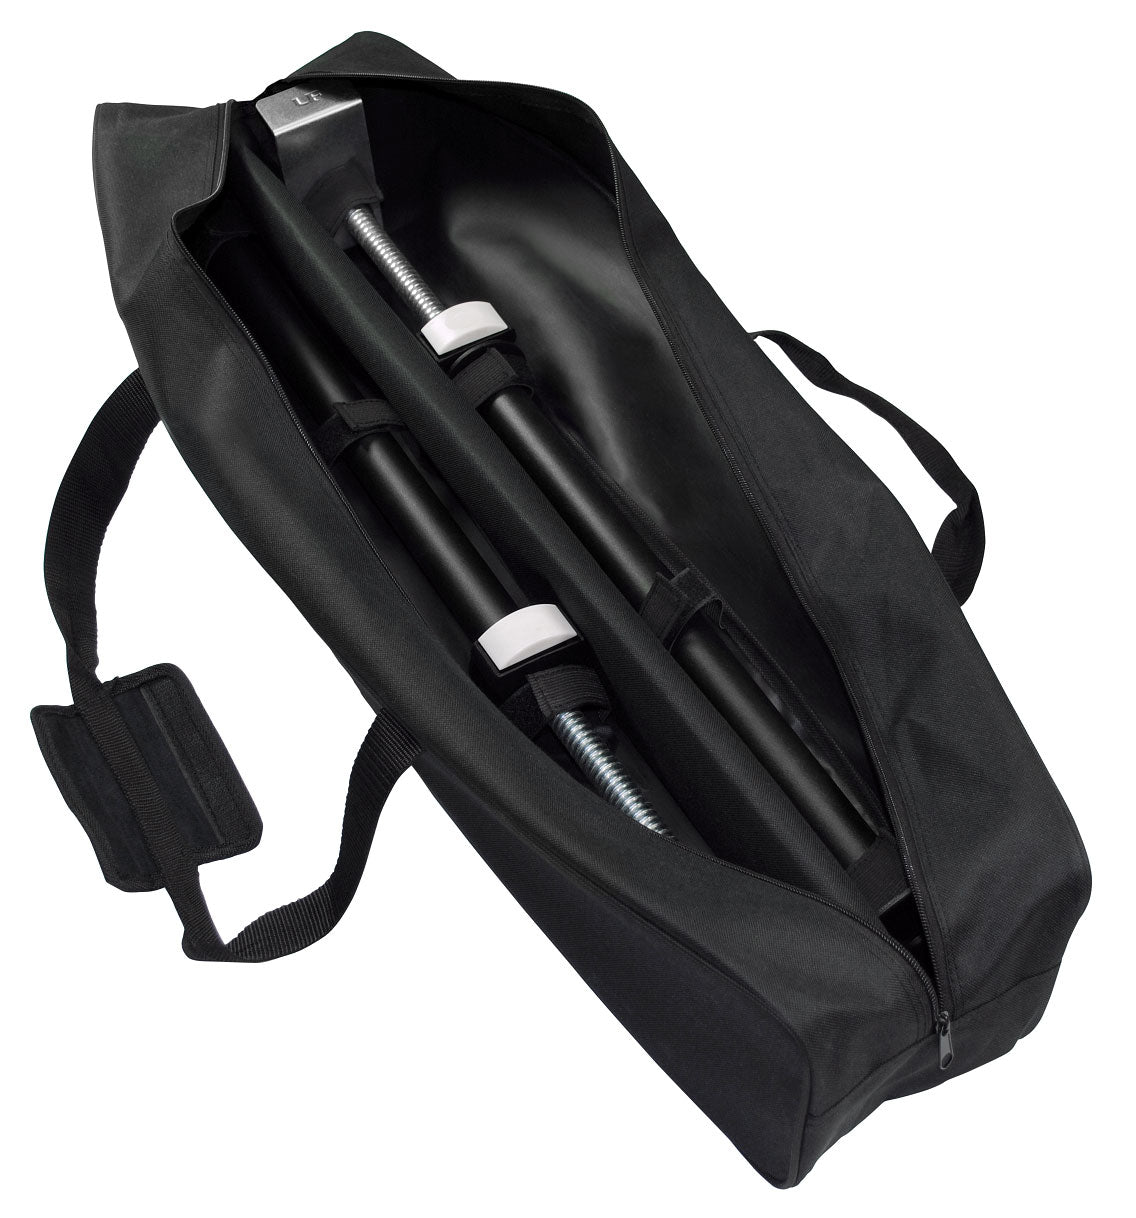 Ultra-Fab 19-960004 Slide Out Support Carry All Bag